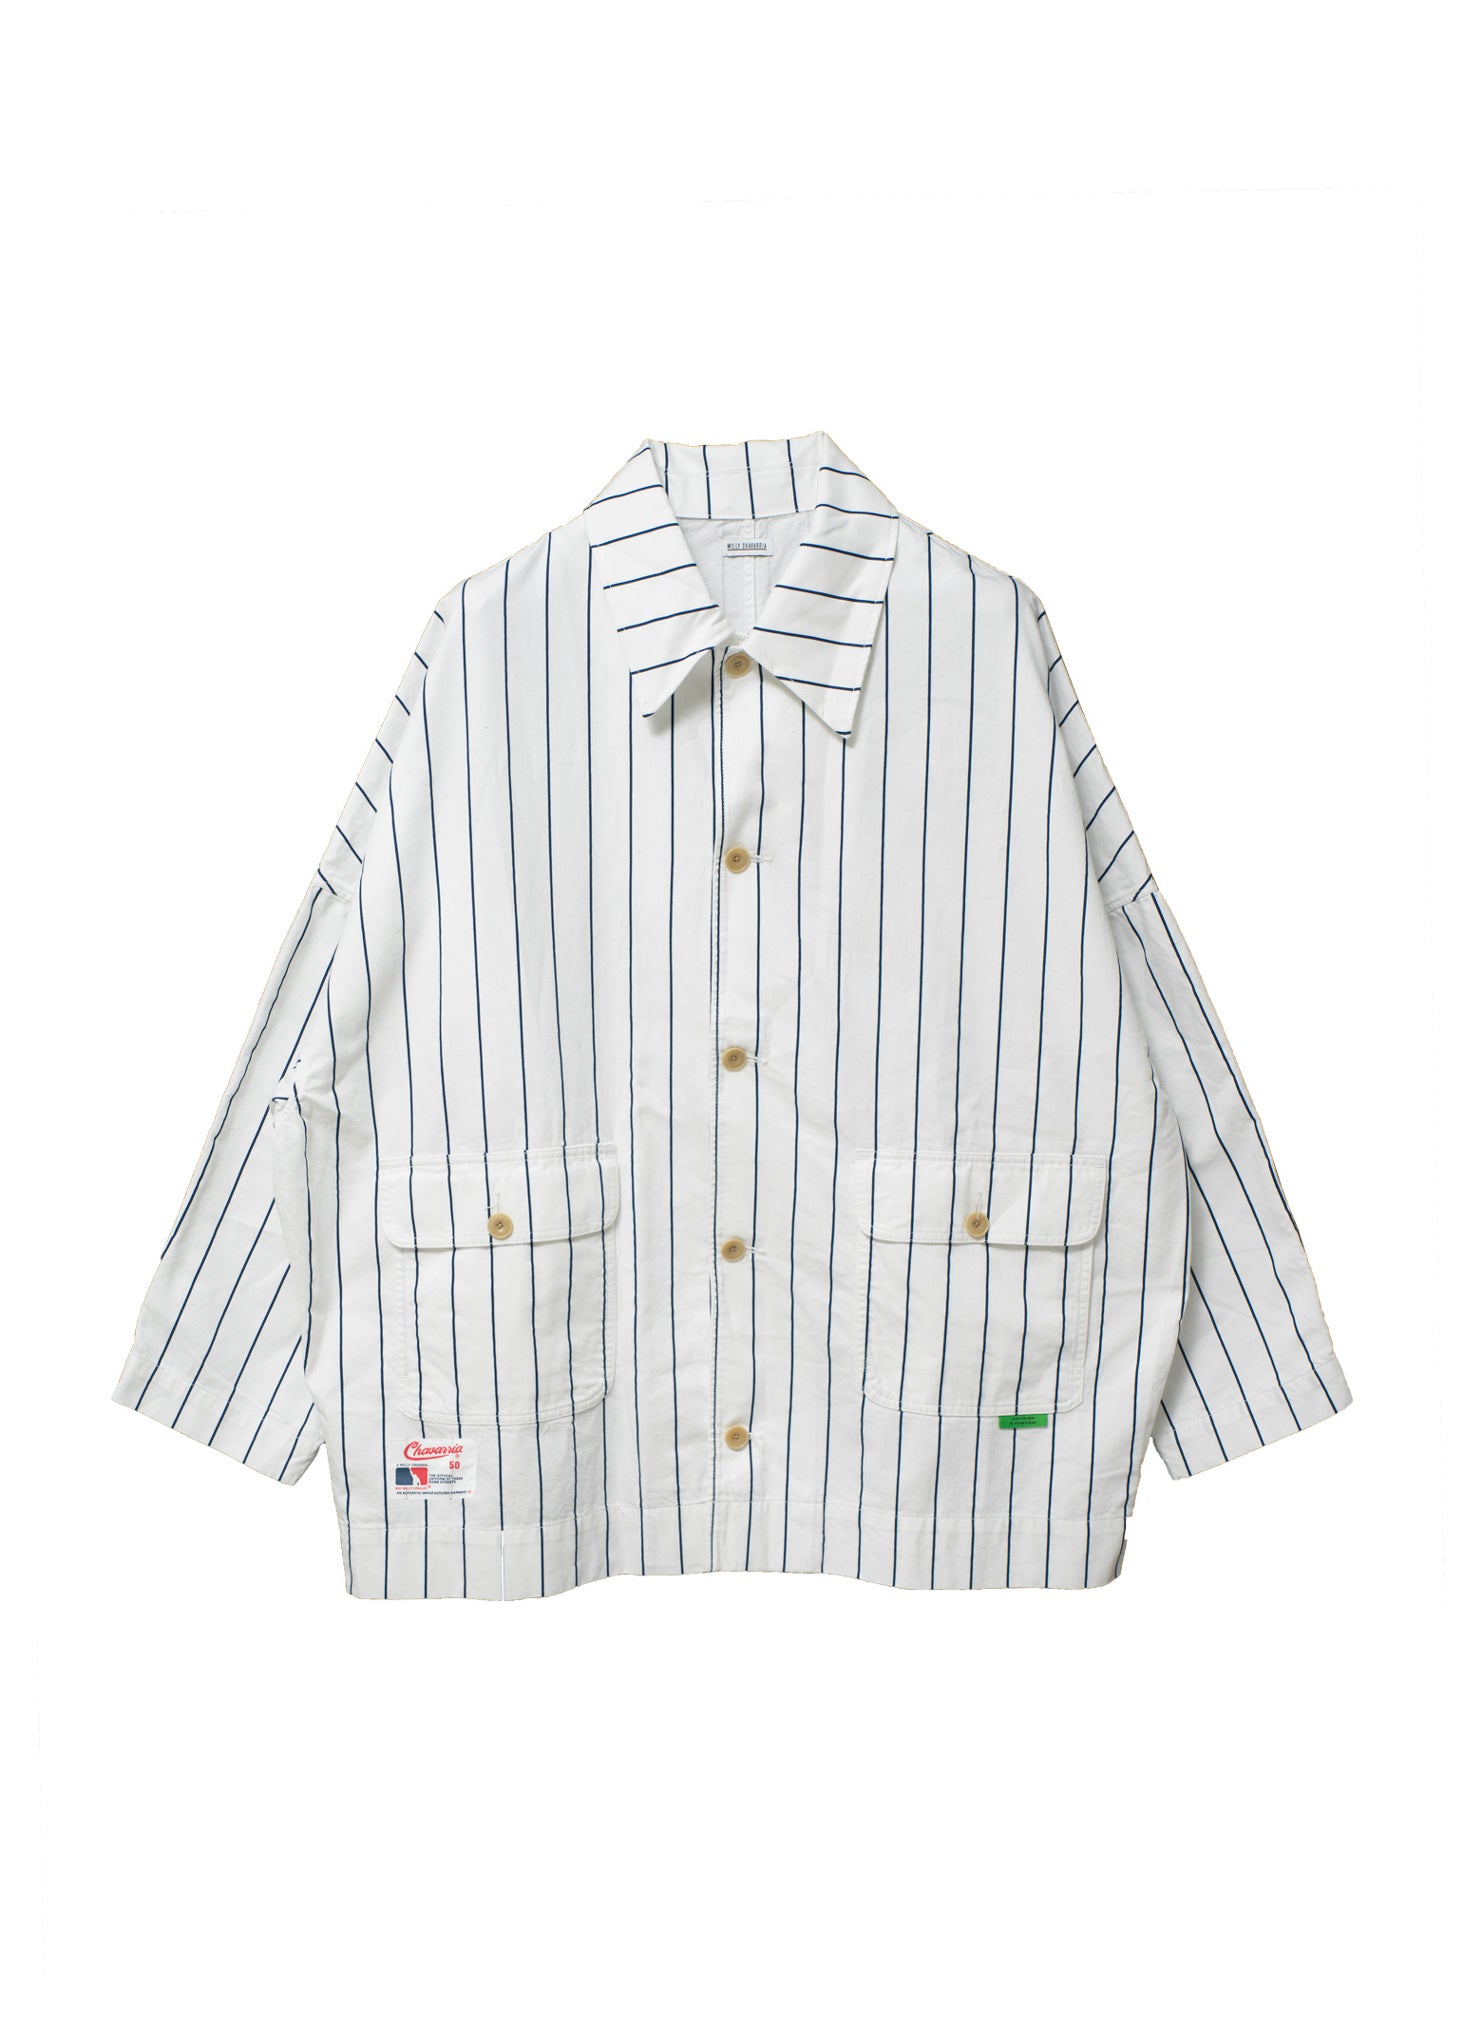 WILLY CHAVARRIA / GONZALES JACKET WHITE